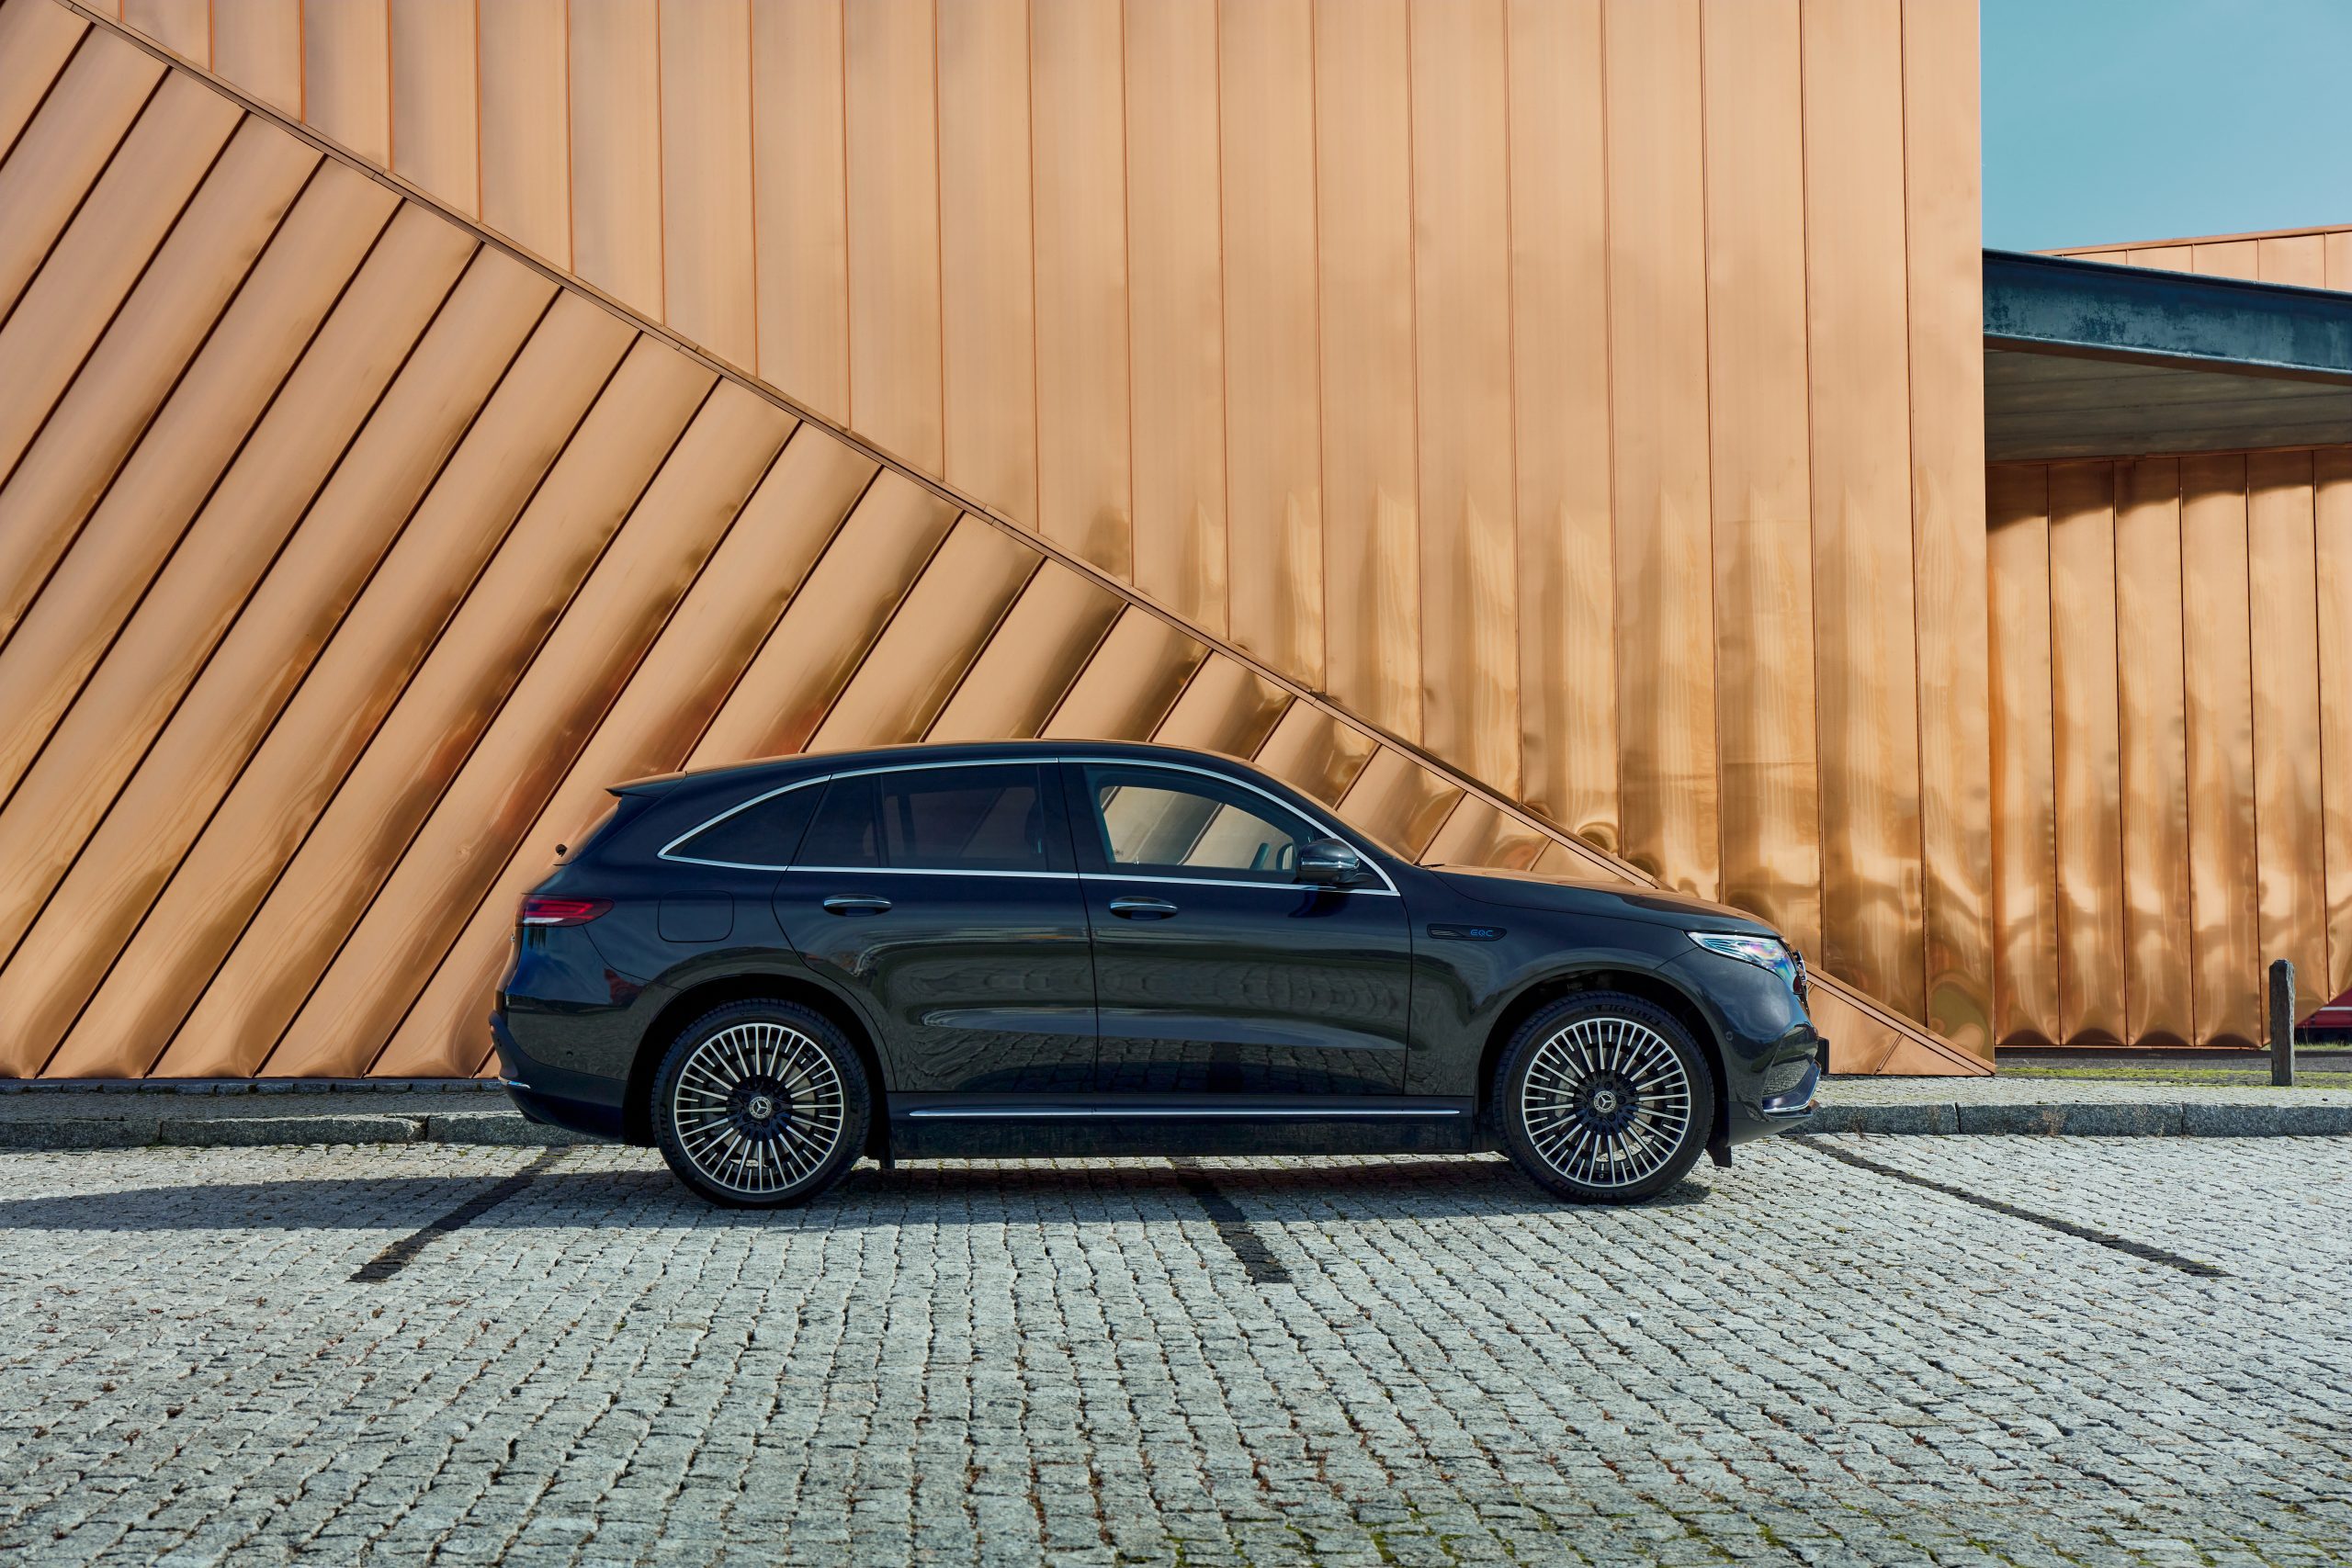 Electric Mercedes Eqc Standing Against The Golden Wall Of The Fire Museum. The Car Has A 408hp Engine And Accelerates 0 100 Km H In 5.1 Seconds. Range (wltp) 369 414 Km. Zory, Poland, 10.06.2020